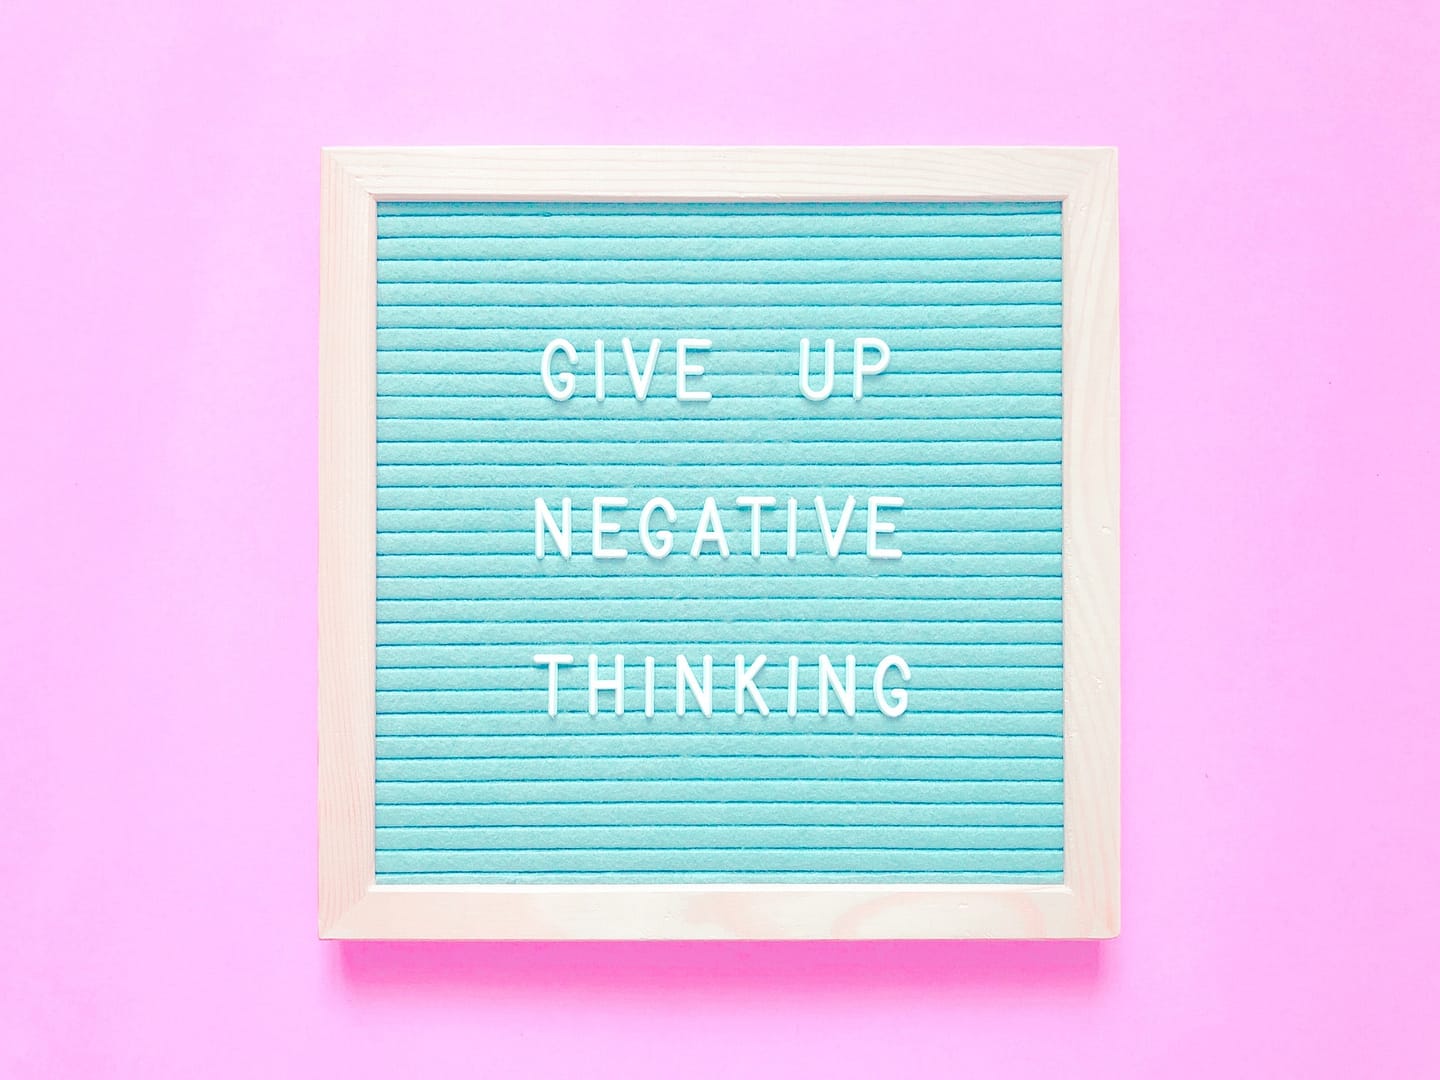 Give up negative thinking ? Stay positive. Optimist. Optimism. Optimistic. Great quote.